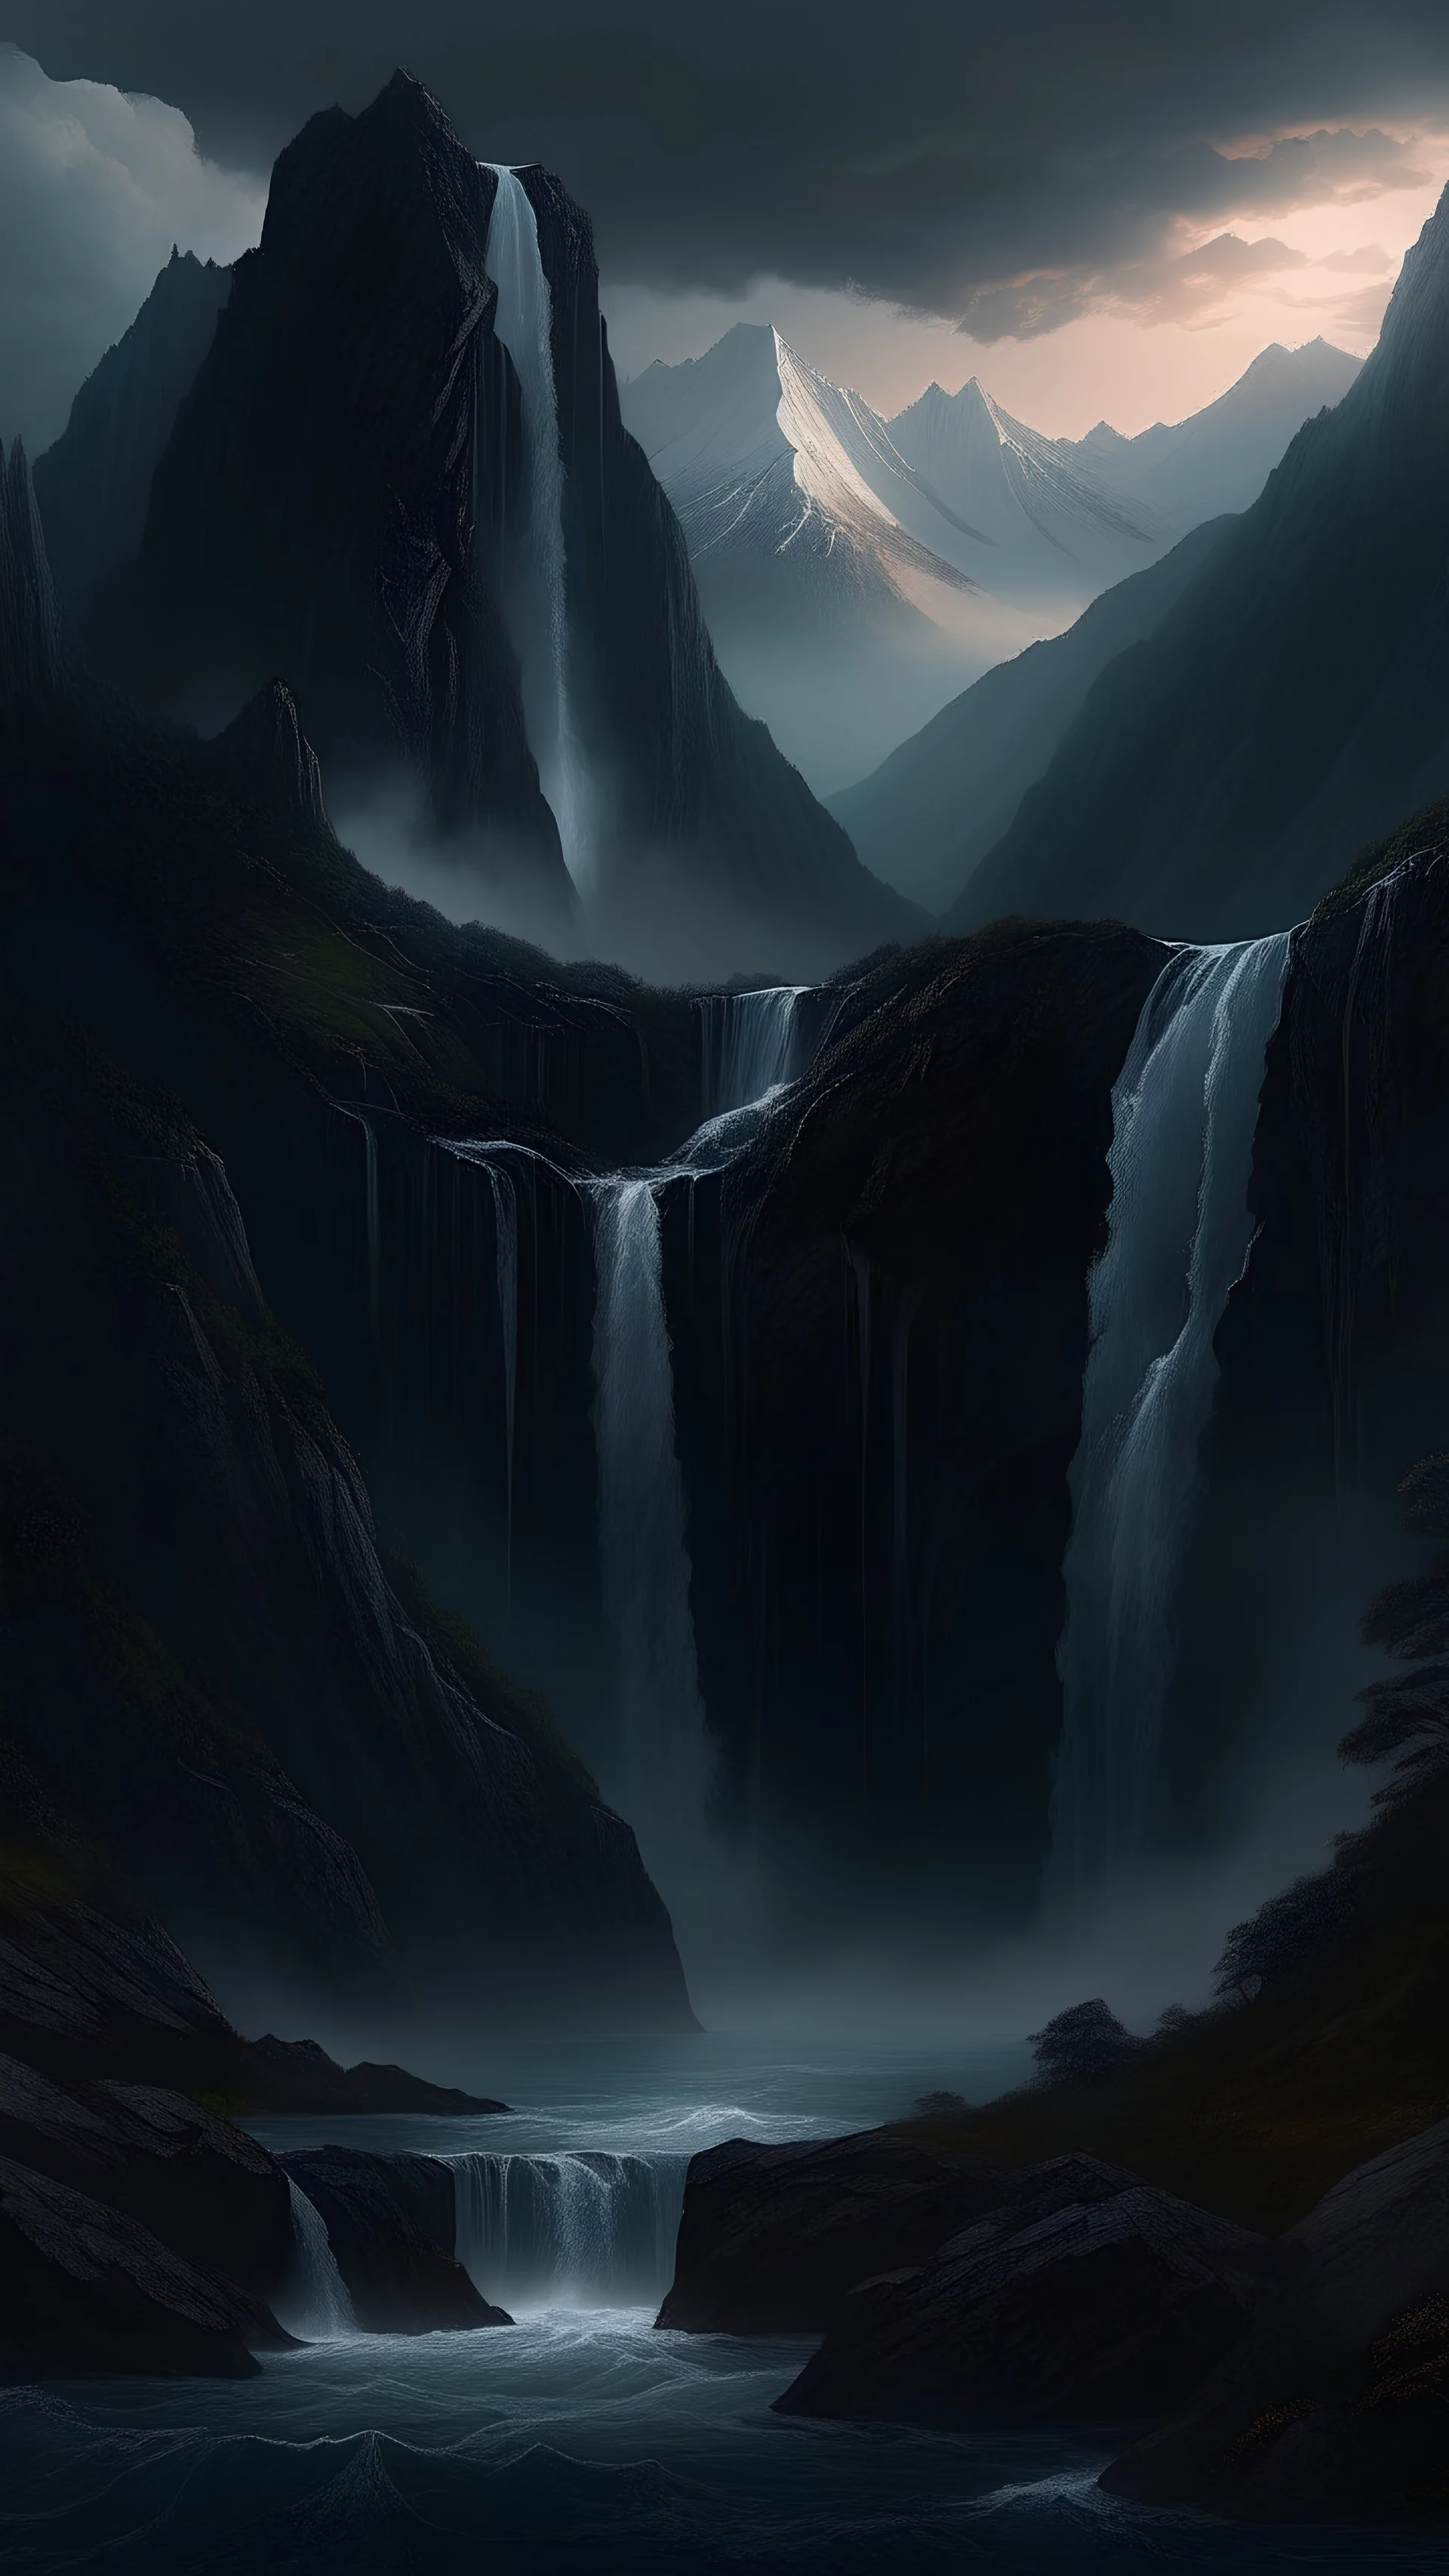 A dark fantasy detailed mountain landscape with a cascading waterfall